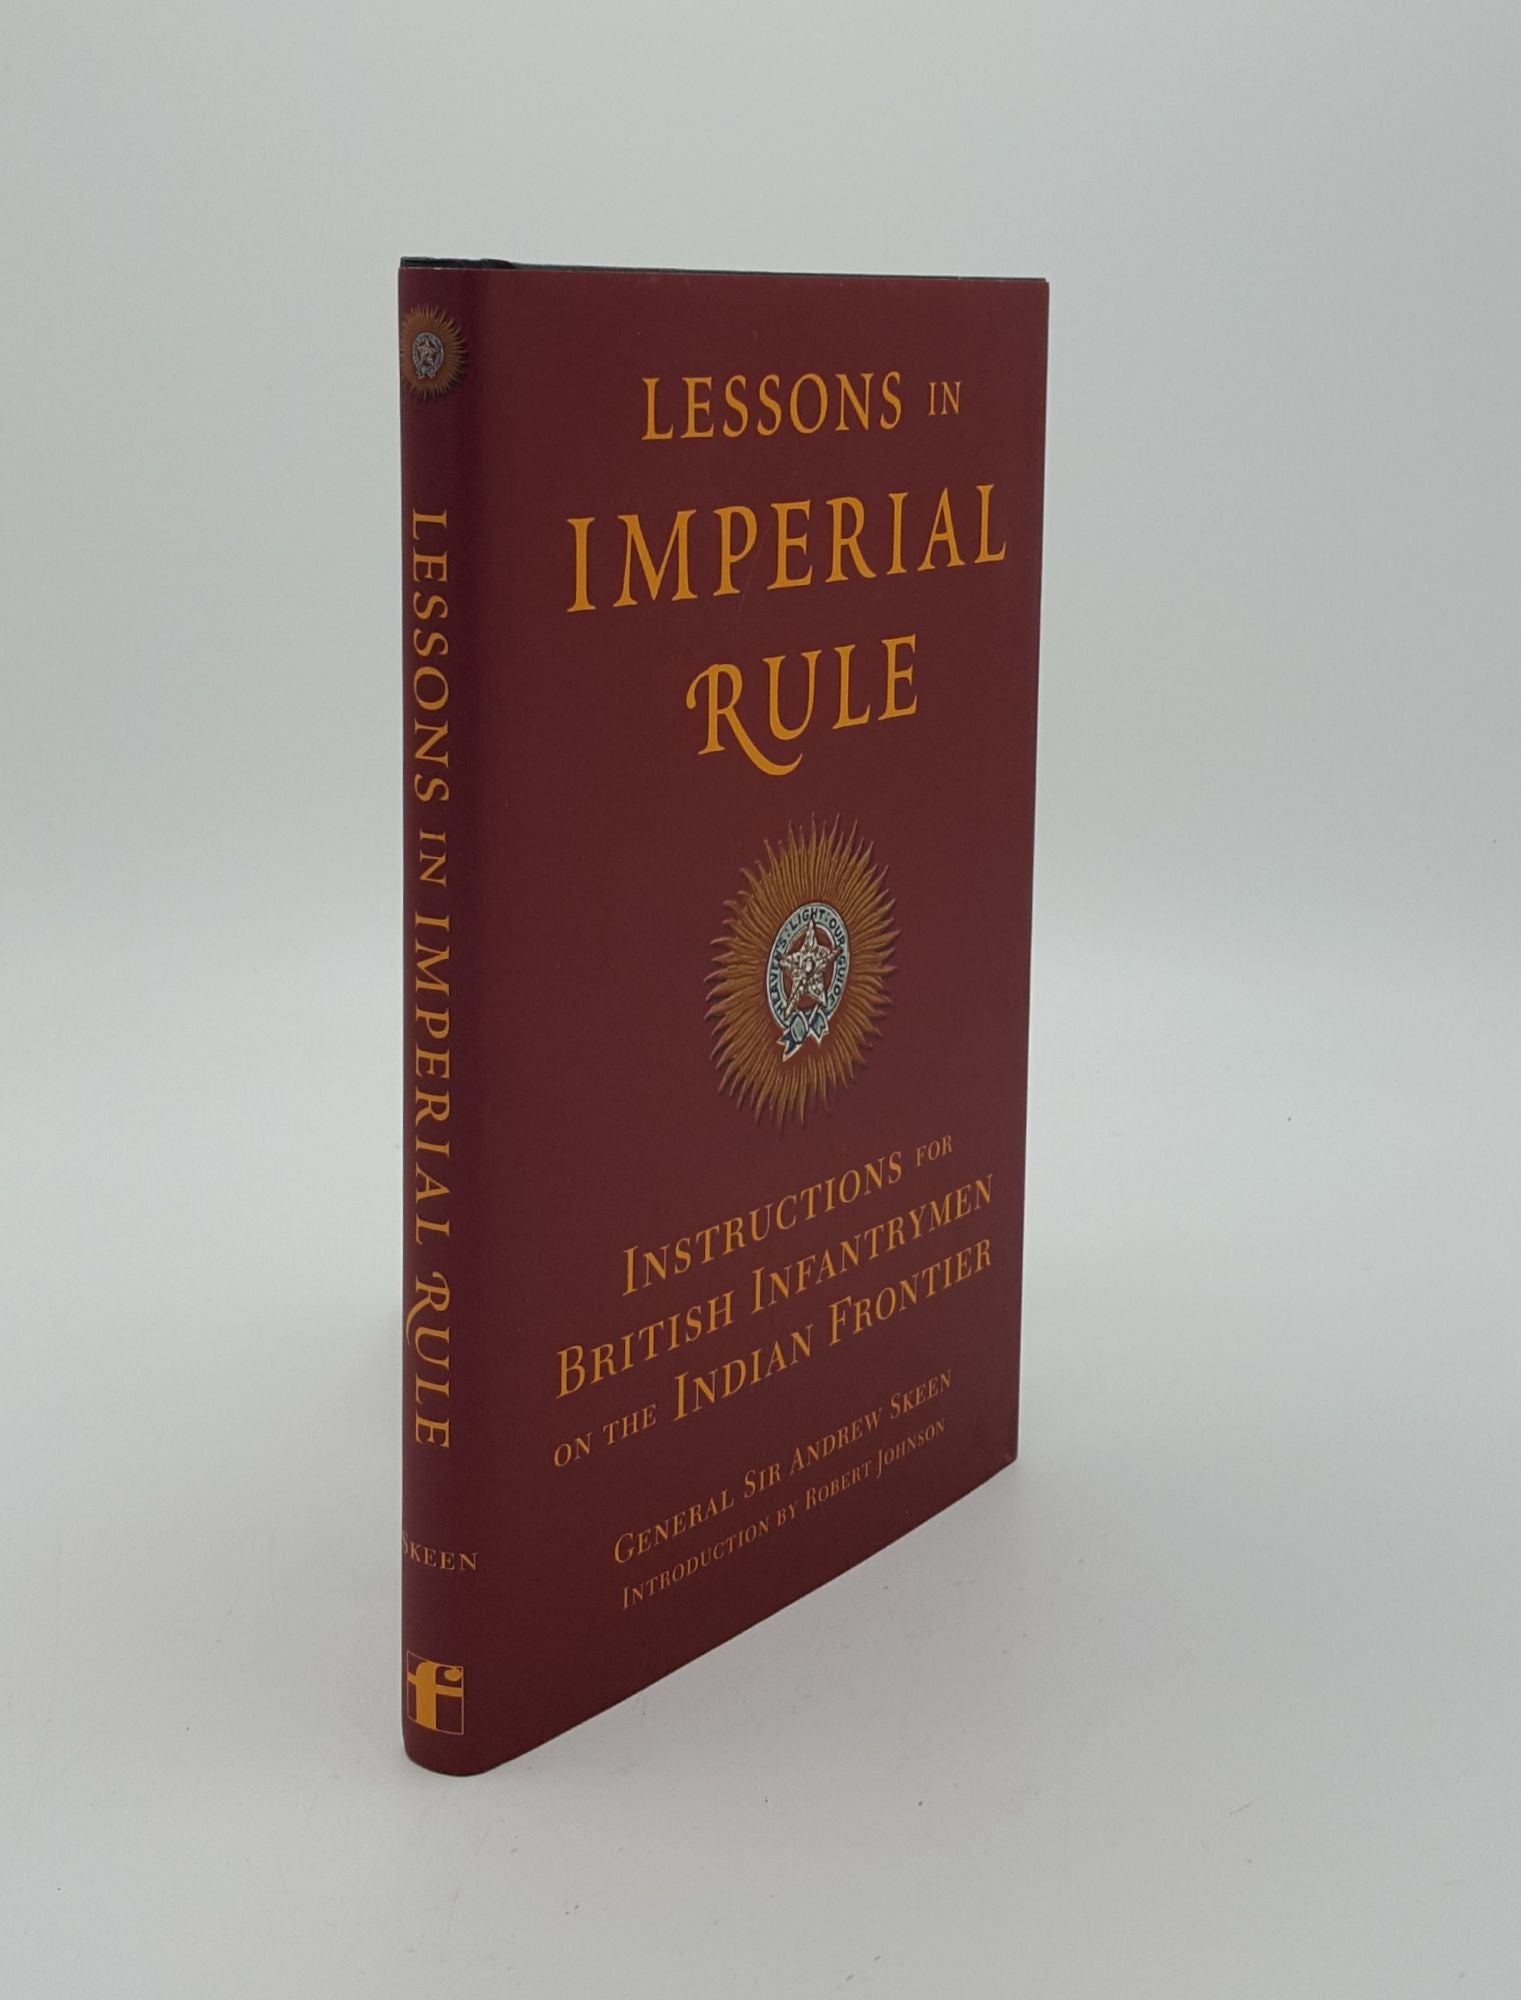 SKEEN Andrew - Lessons in Imperial Rule Instructions for British Infantrymen on the Indian Frontier